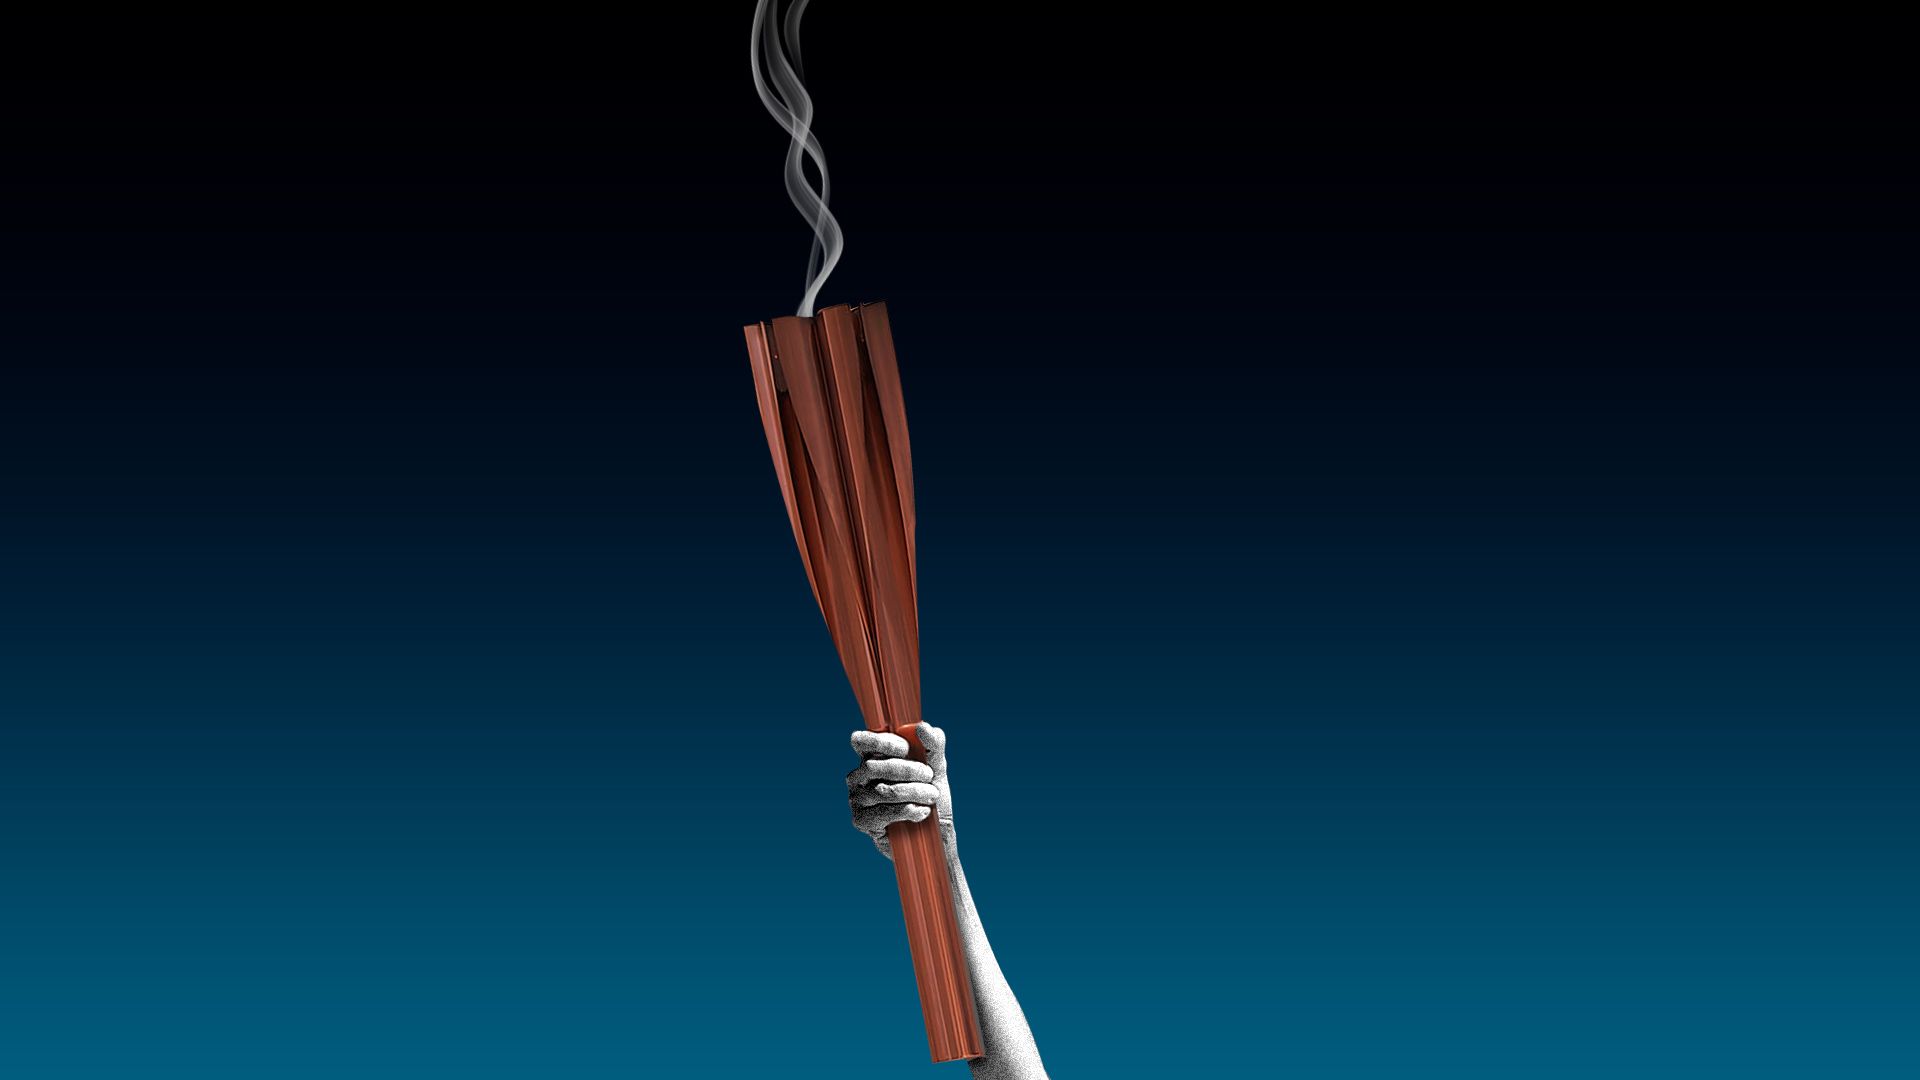 Illustration of the Olympic torch extinguished